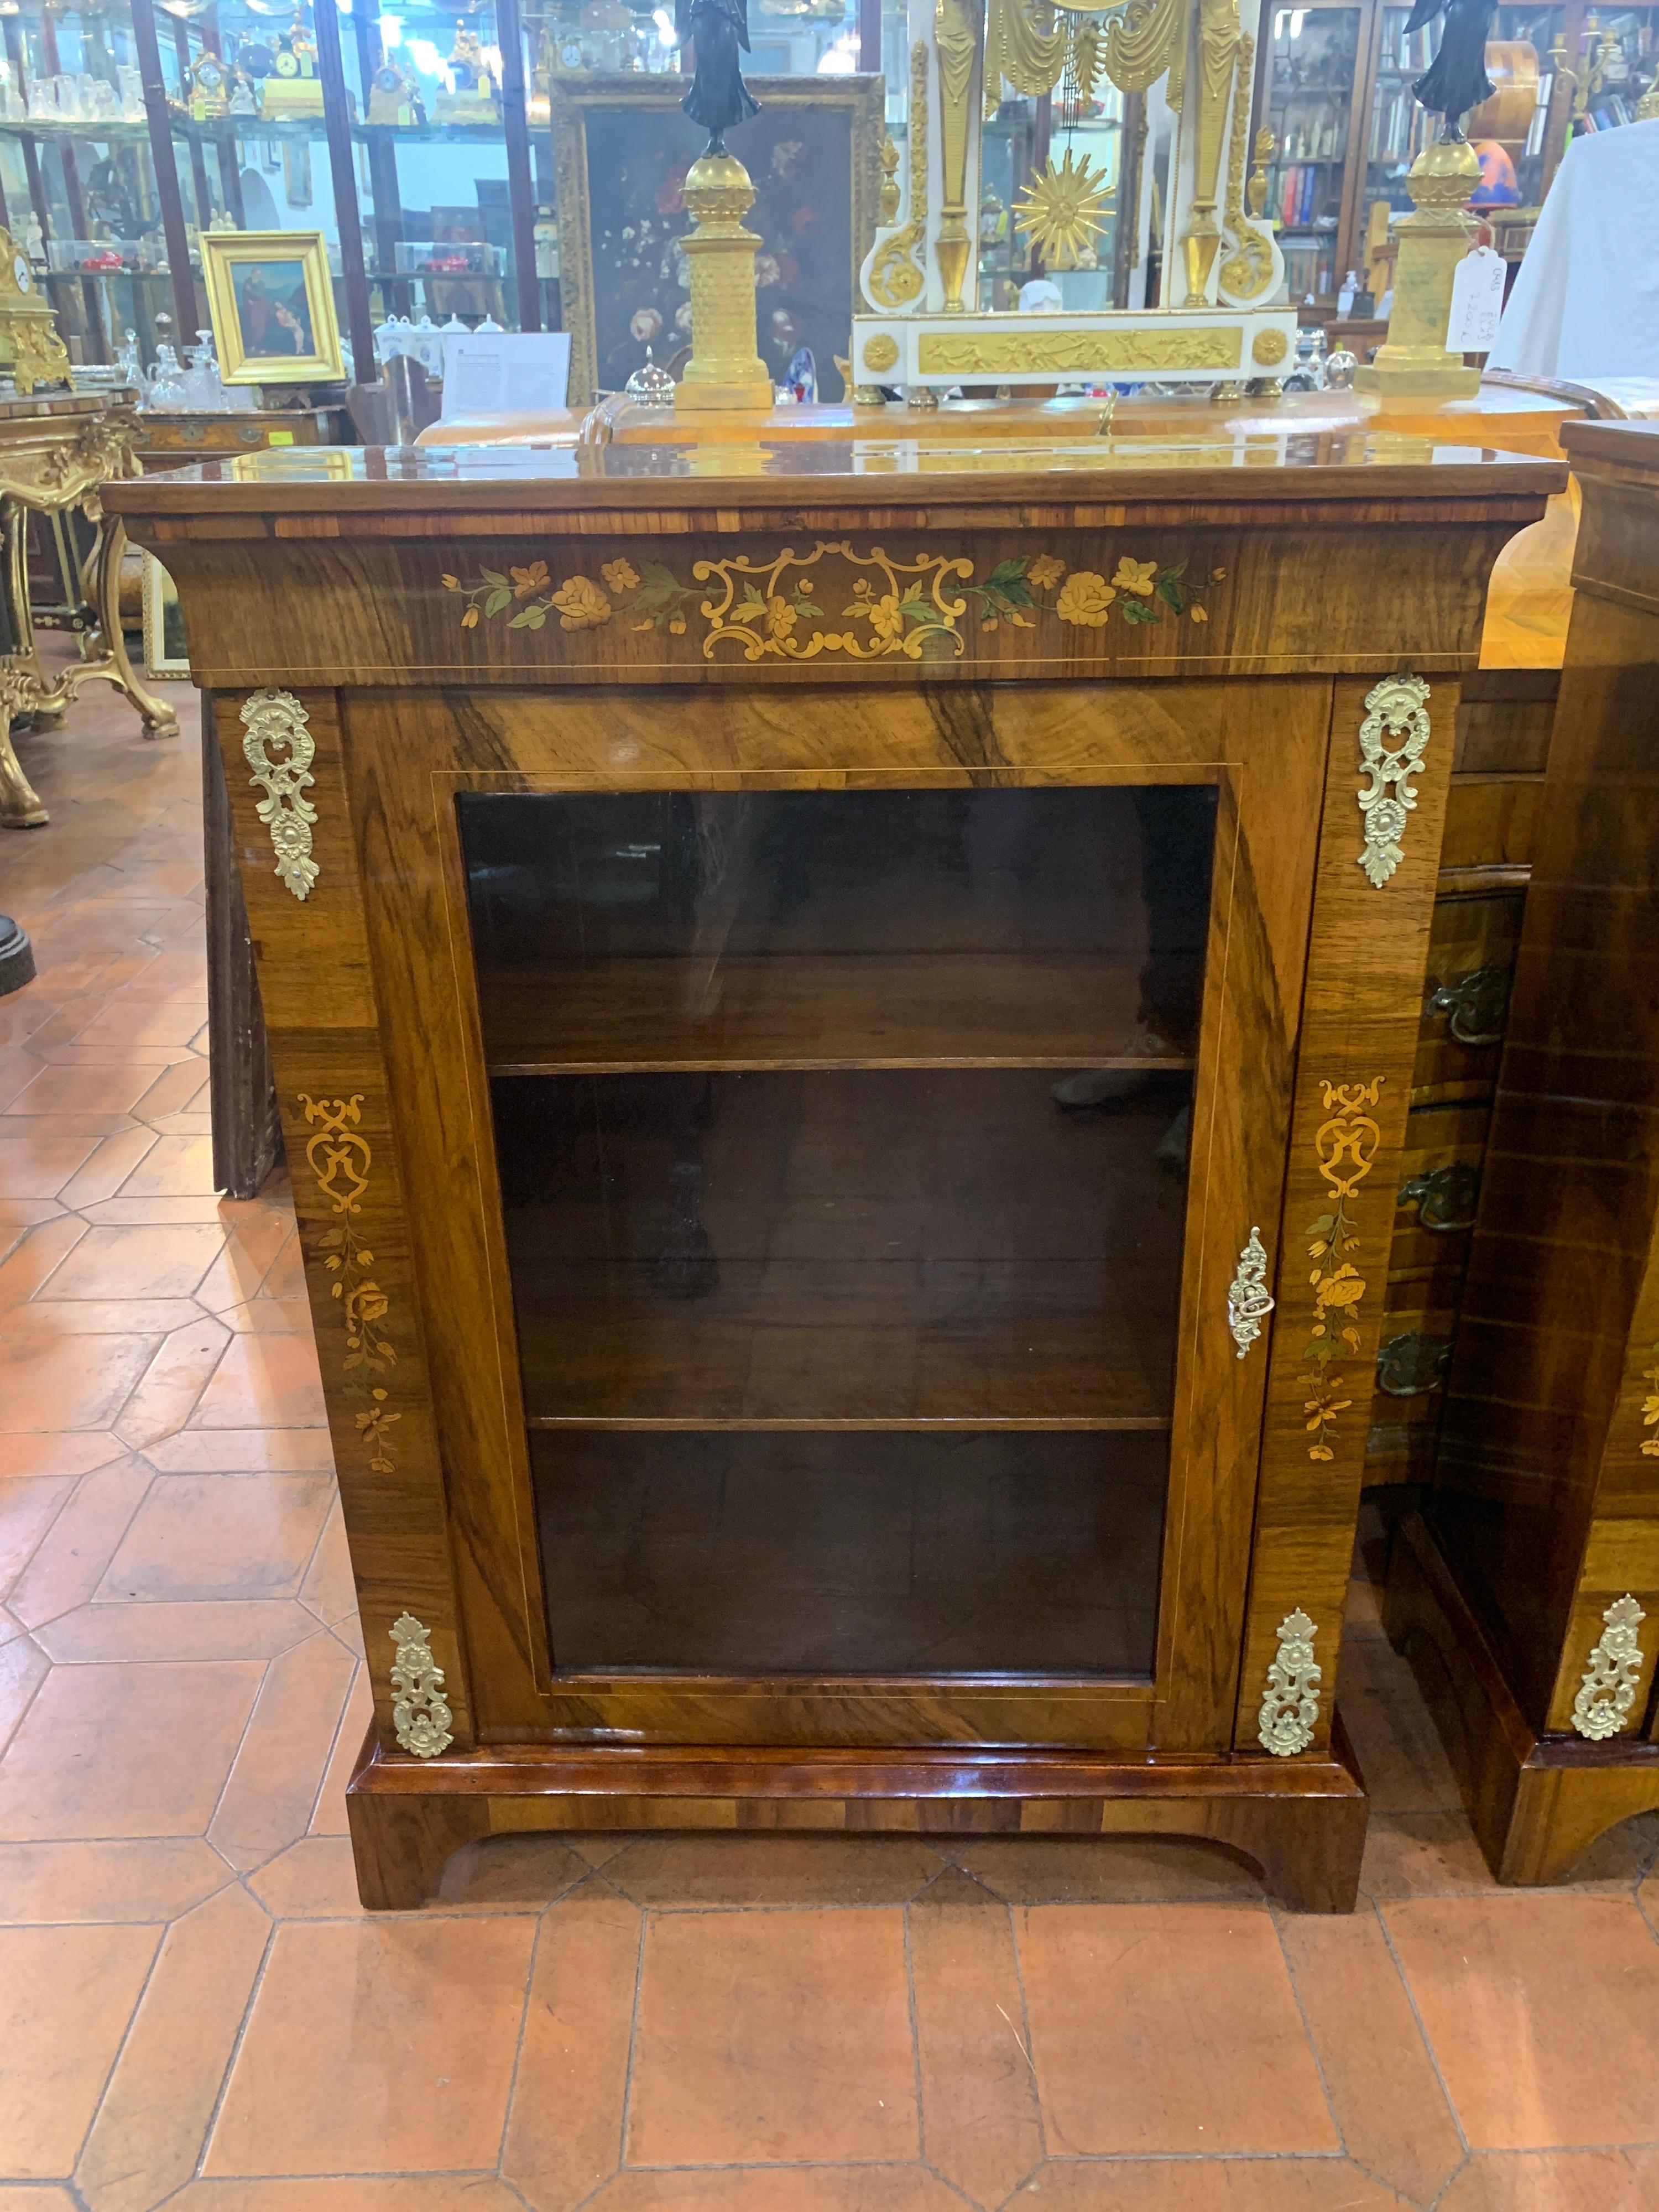 Fantastic pair of pier cabinet, England 19th century, Victorian period. Finely inlaid with floral motifs in fruitwood, decorated with gilded ormolu mounts. Restored in spirit and shellac. Furniture easy to fit into any furnishing context.
This pair